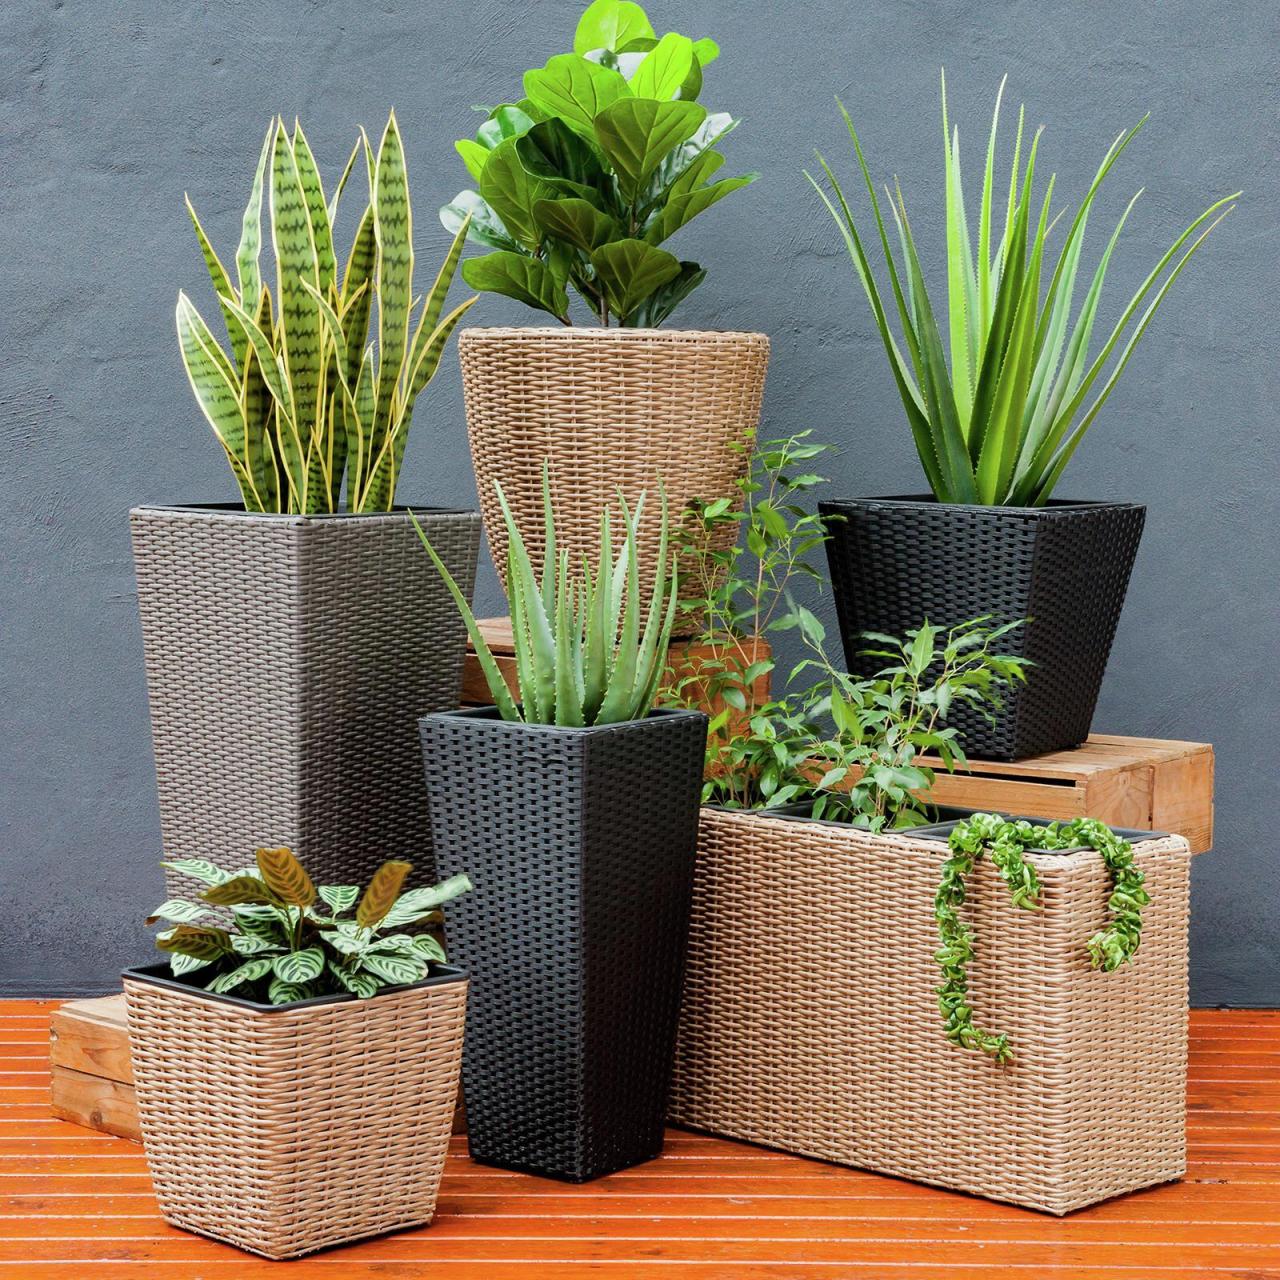 Hanging Plants Indoor | Bunnings Large Pot Planters: Enhance Your Home and Garden